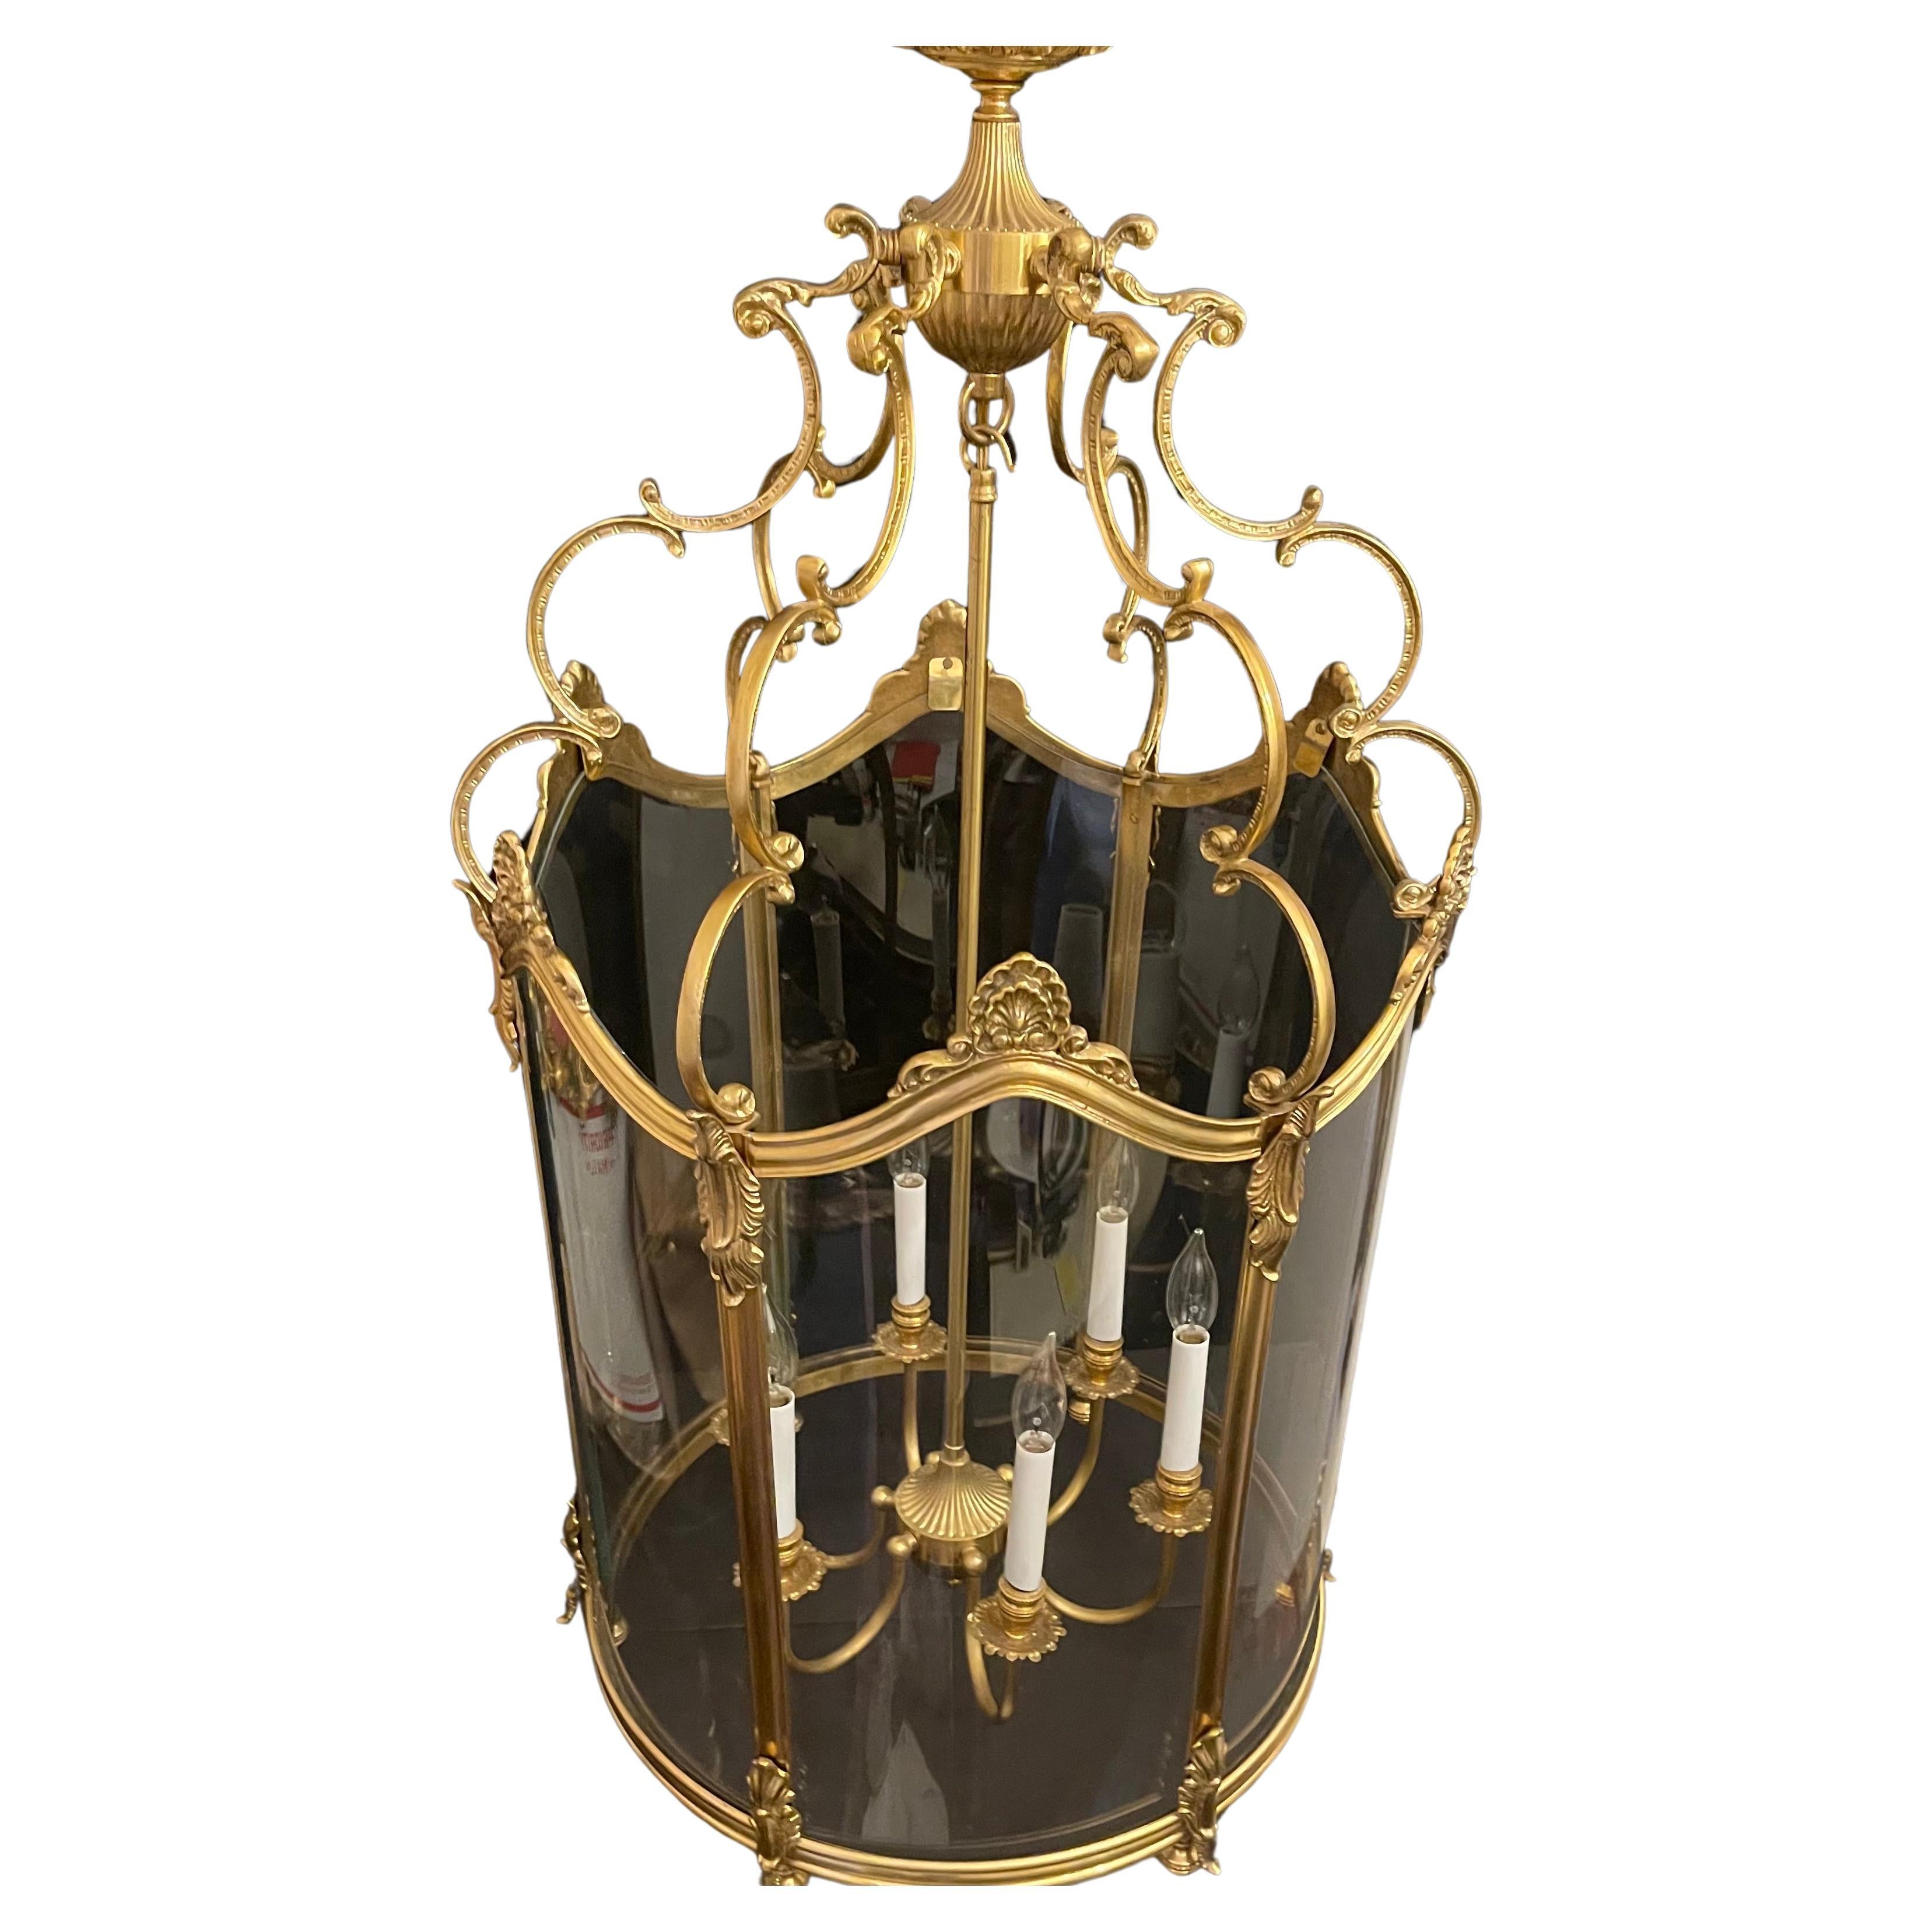 A Wonderful Large French Dore Bronze Rococo Louis XV Style With Original Bent / Curved Blown Glass 6 Candelabra Light Lantern Chandelier Fixture

Recently Rewired And Comes With Chain And Canopy